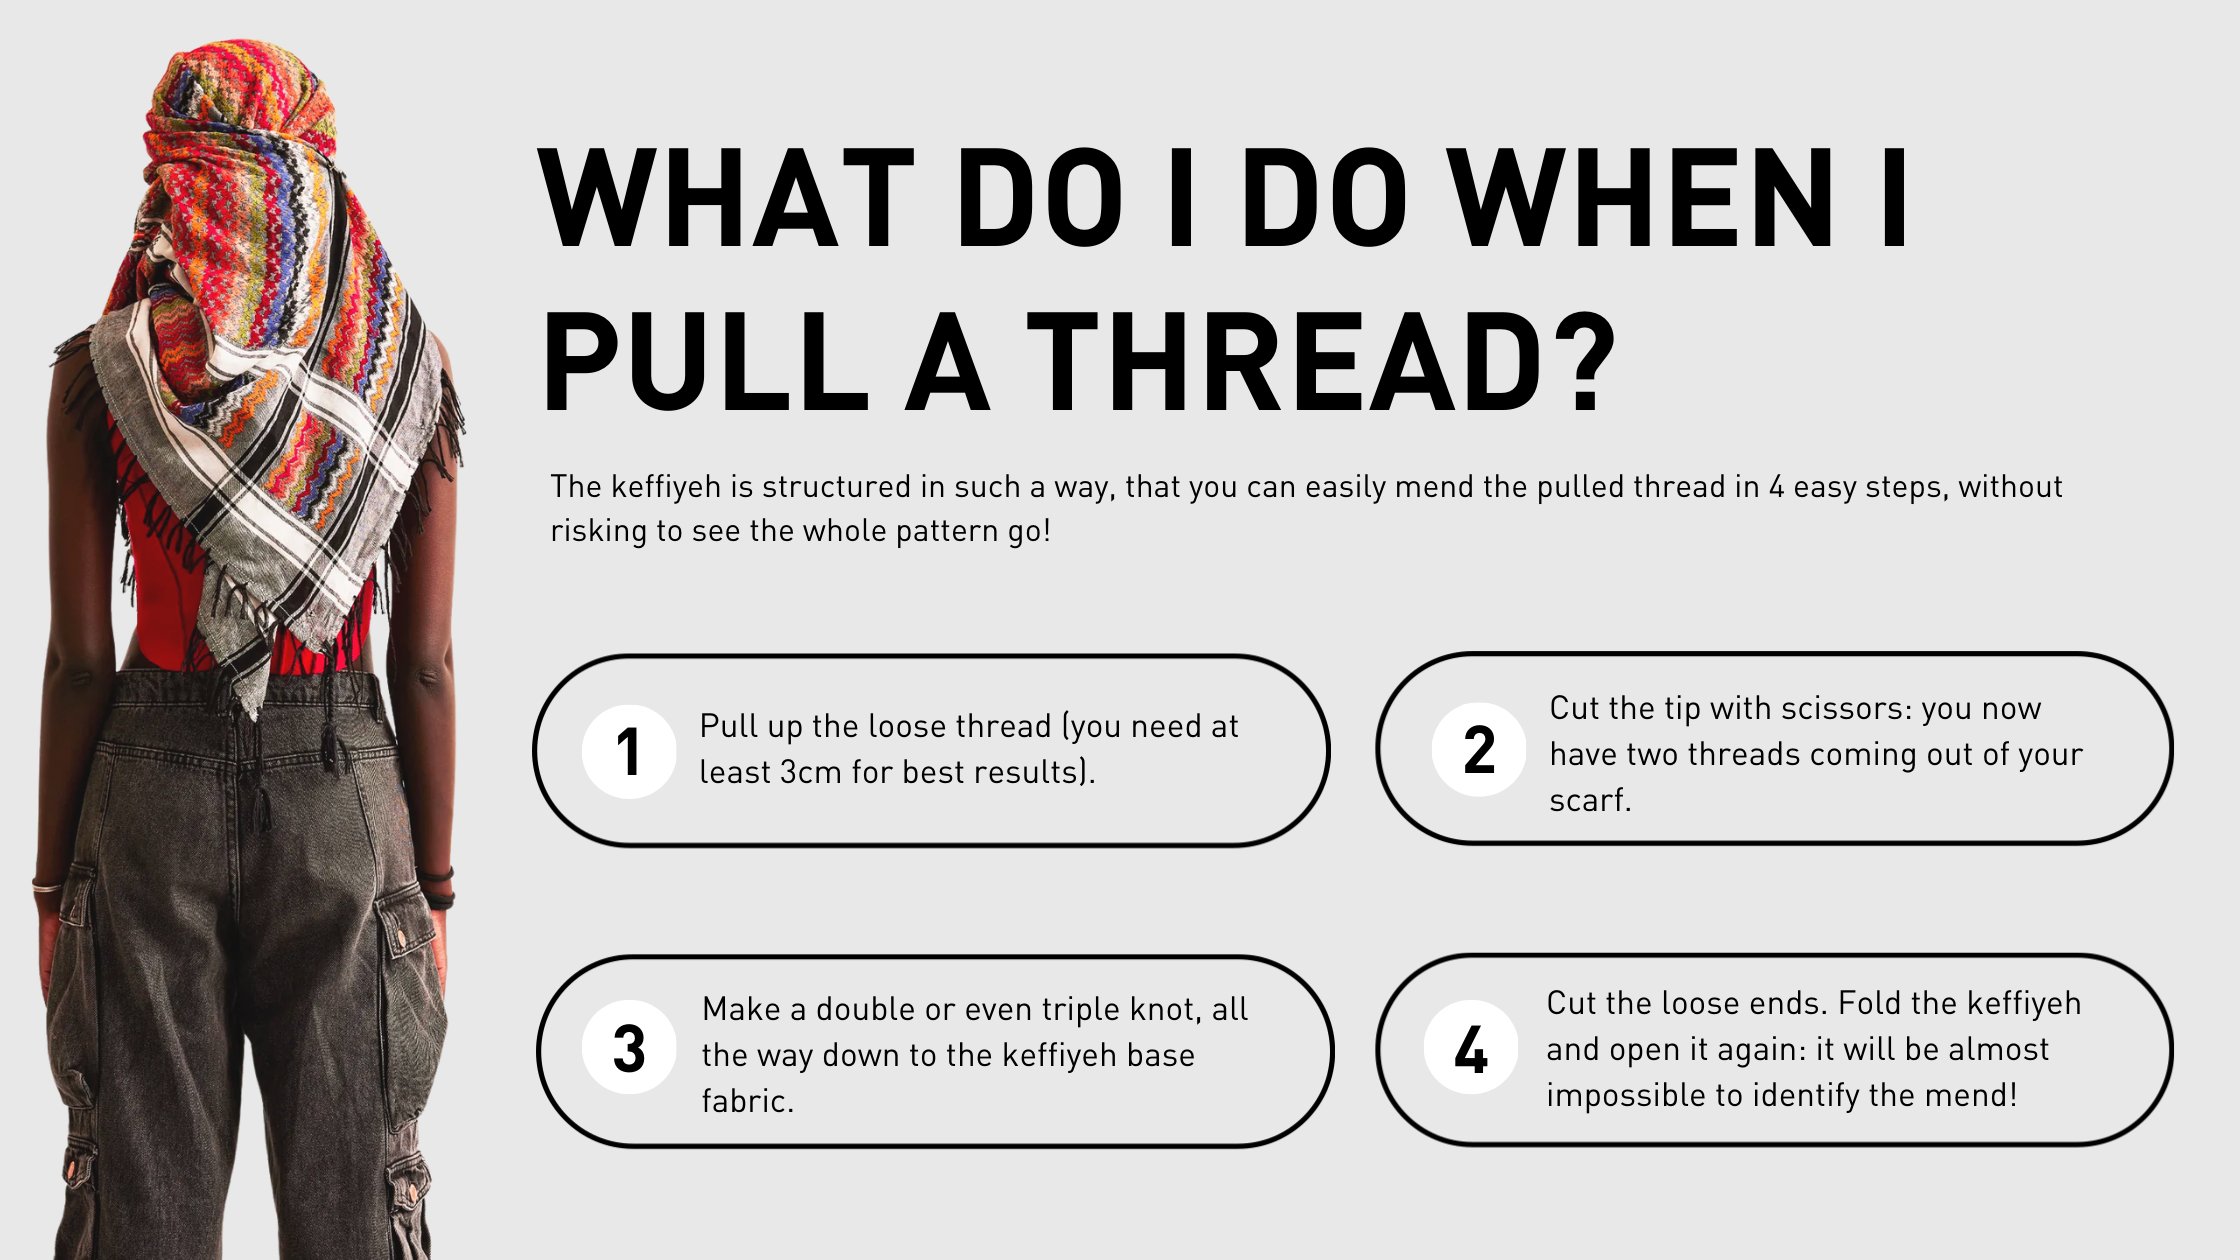 WHAT DO I DO WHEN I PULL A THREAD?